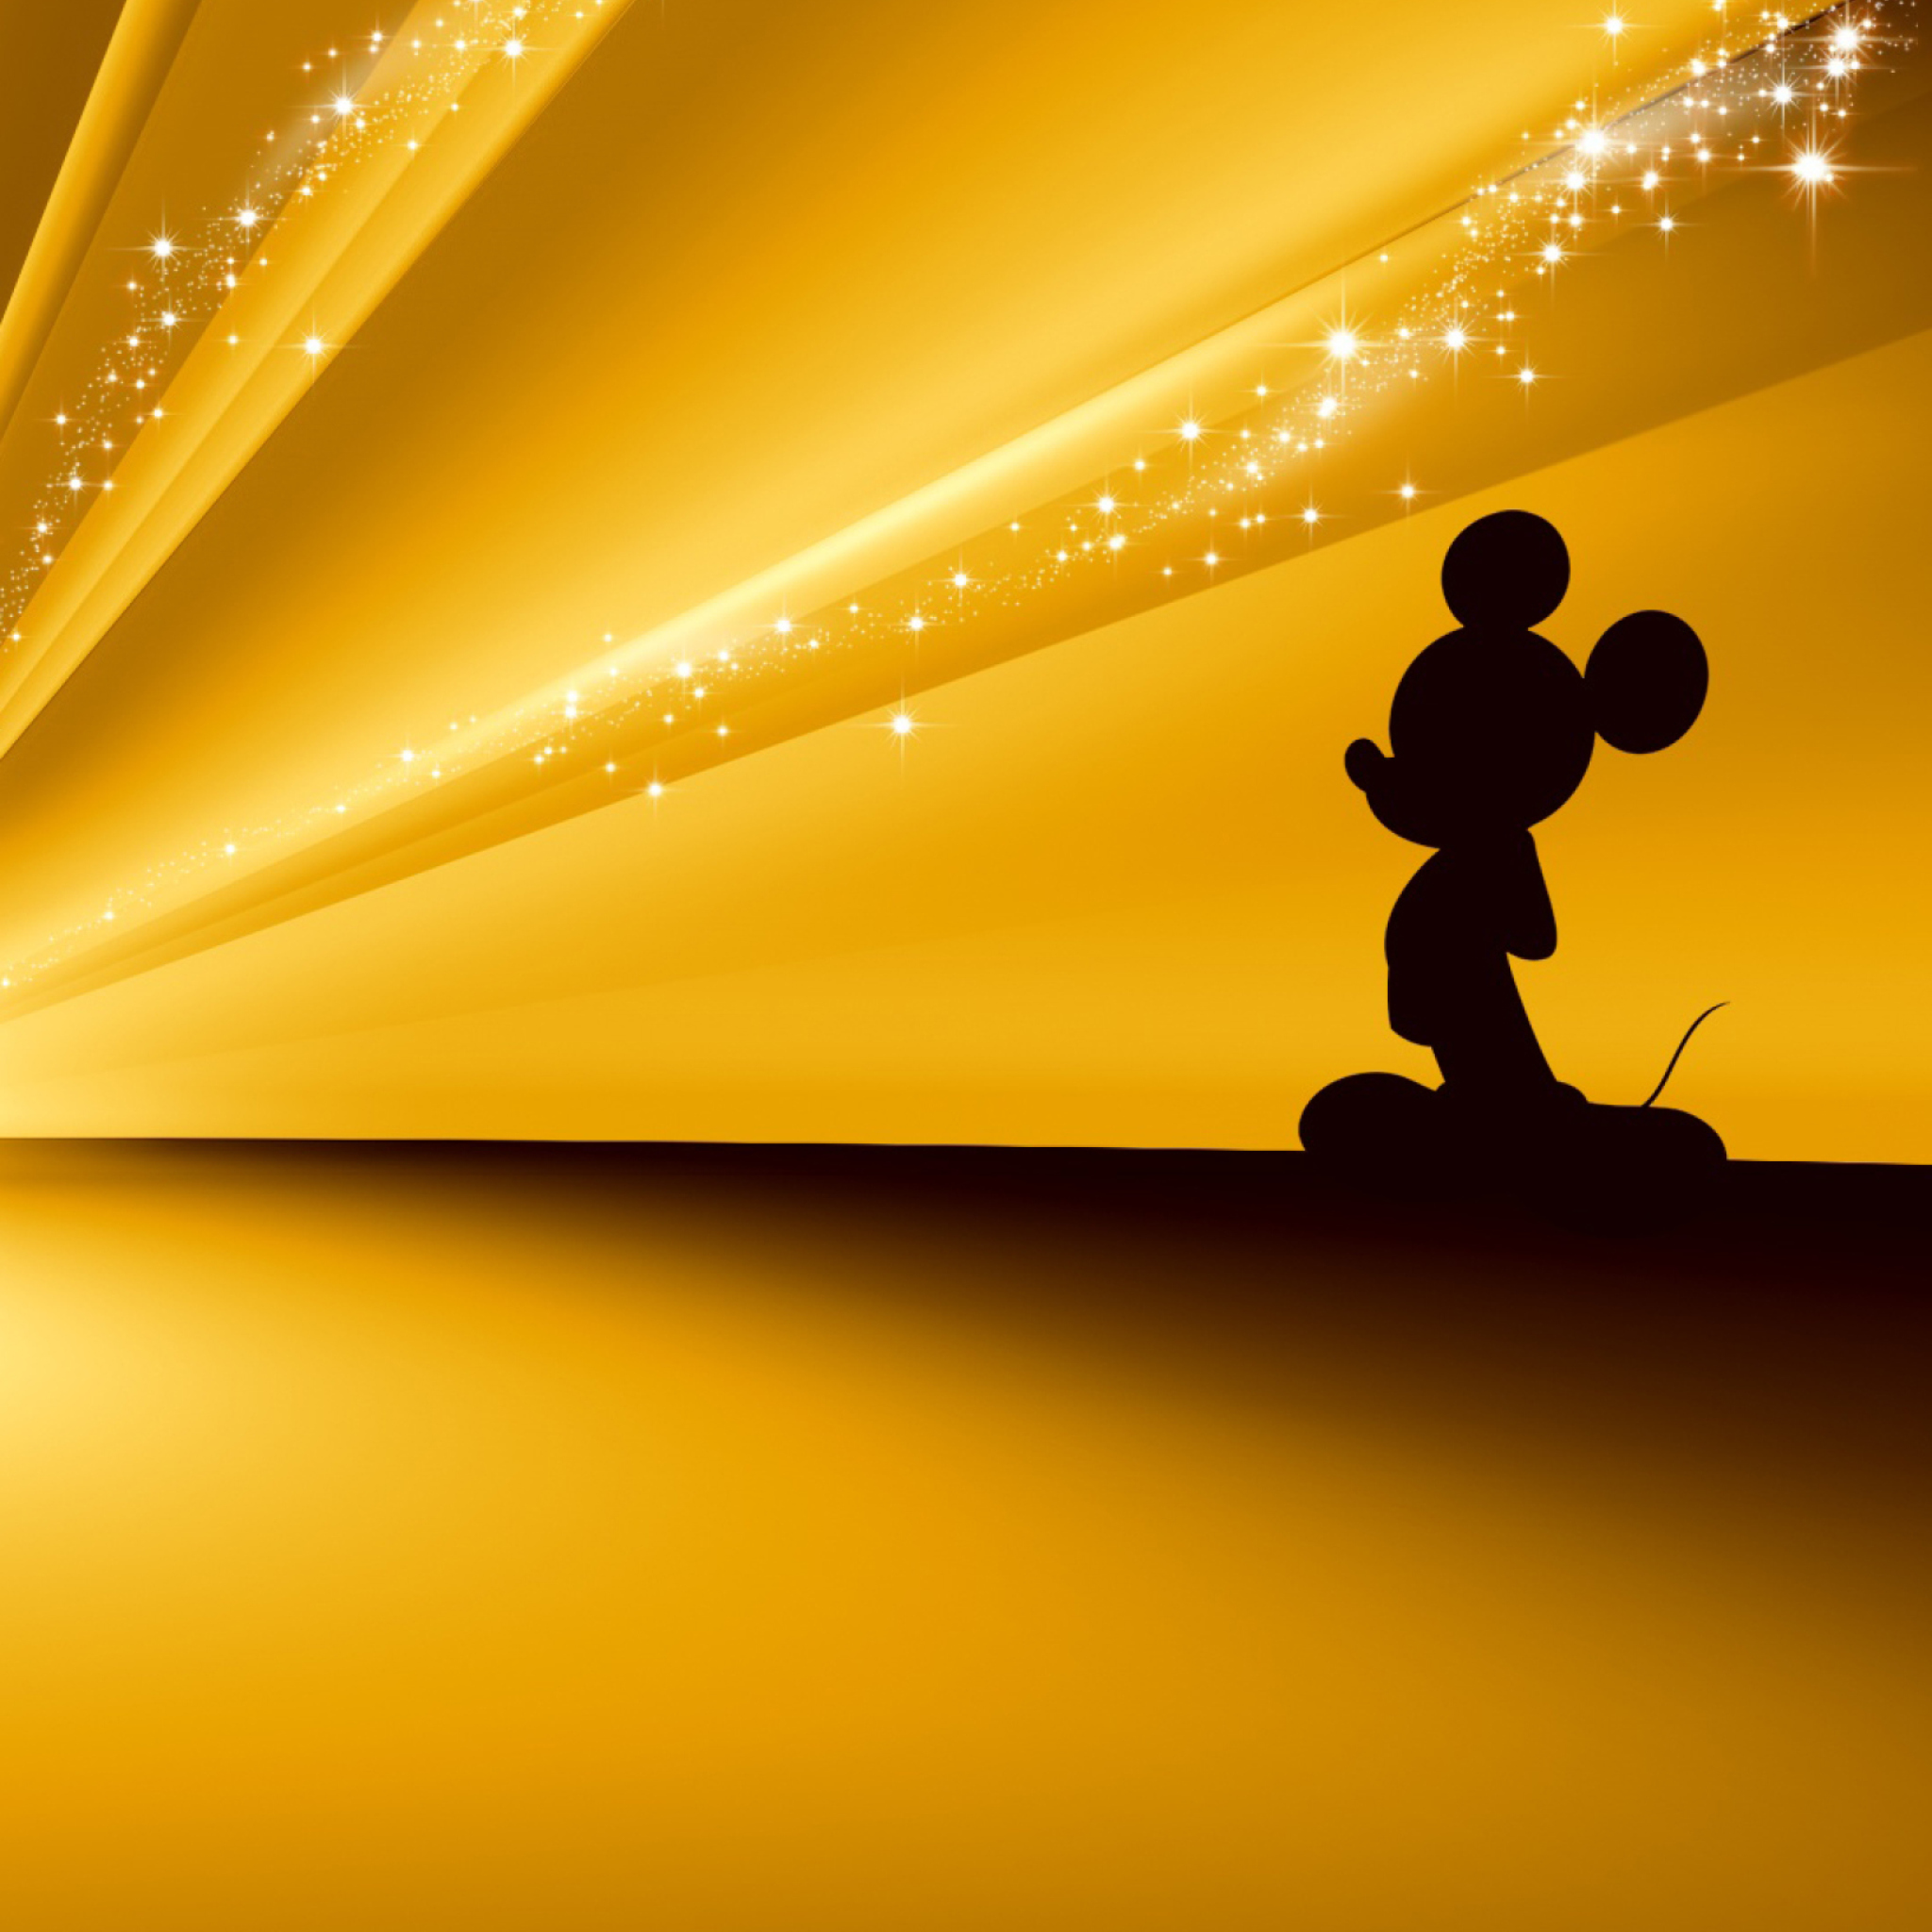 Mickey Mouse Disney Gold Wallpaper Wallpaper For Ipad Air